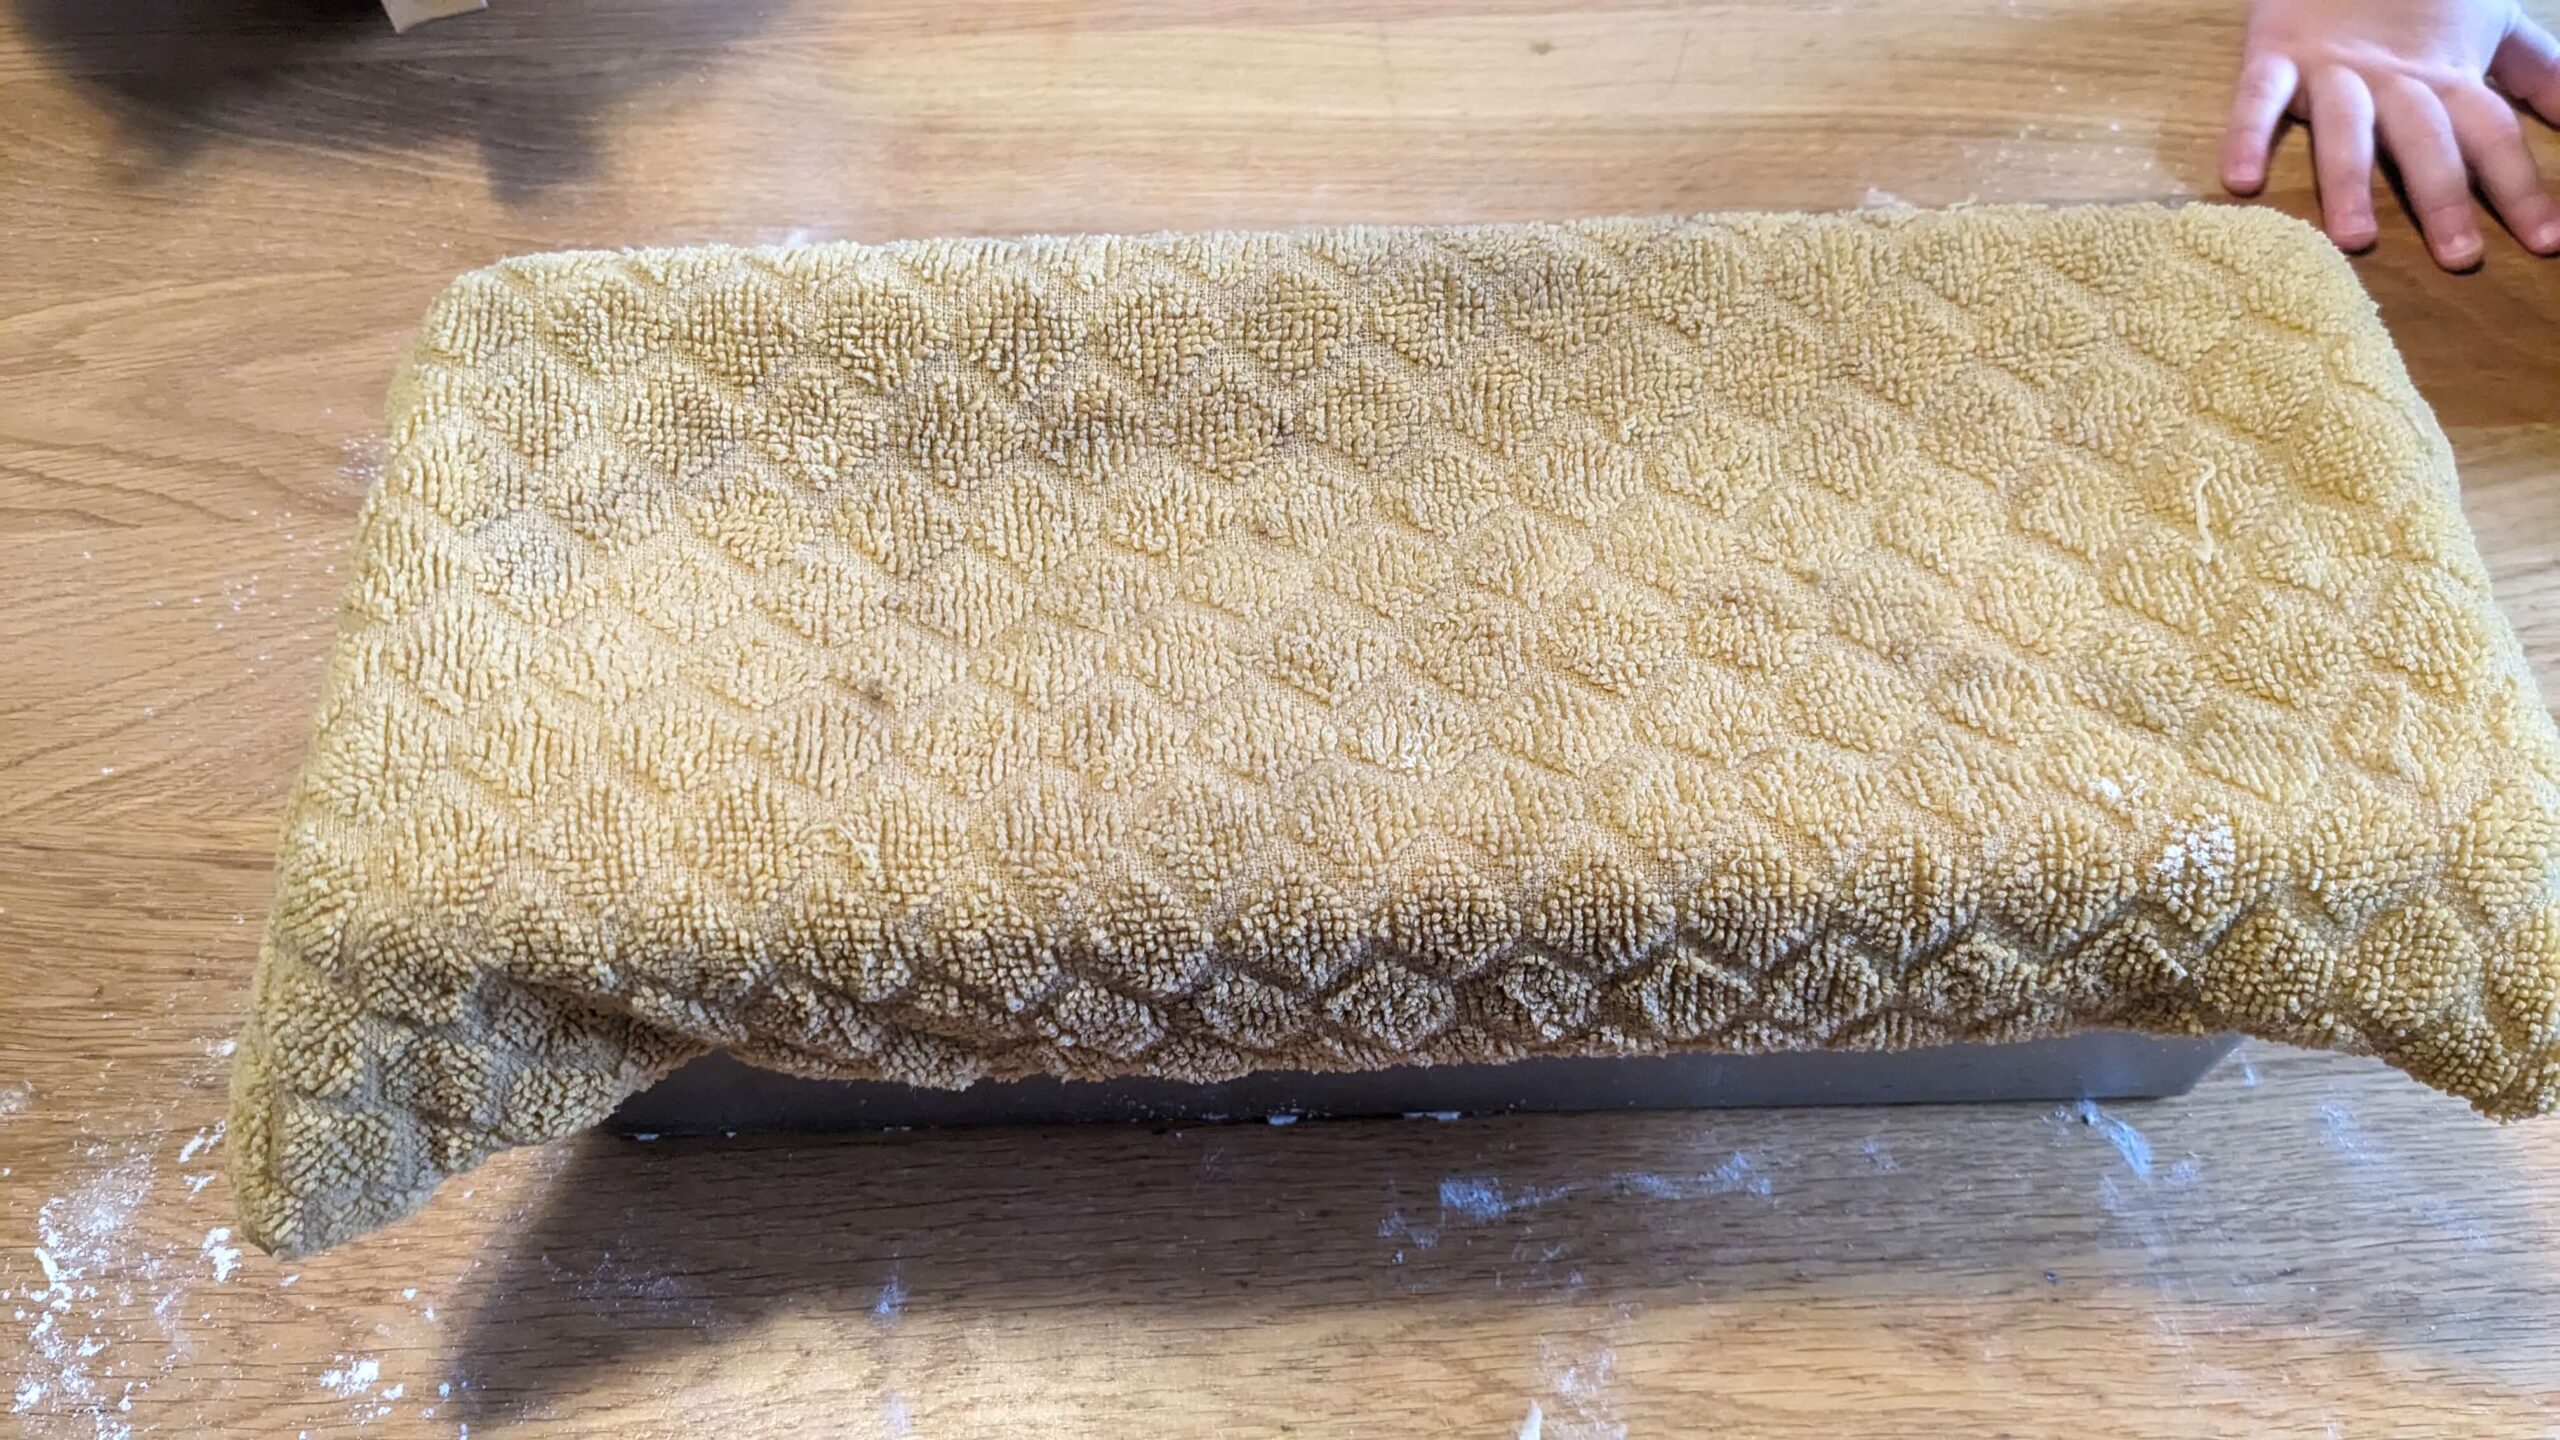 damp yellow towel on a pullman loaf pan